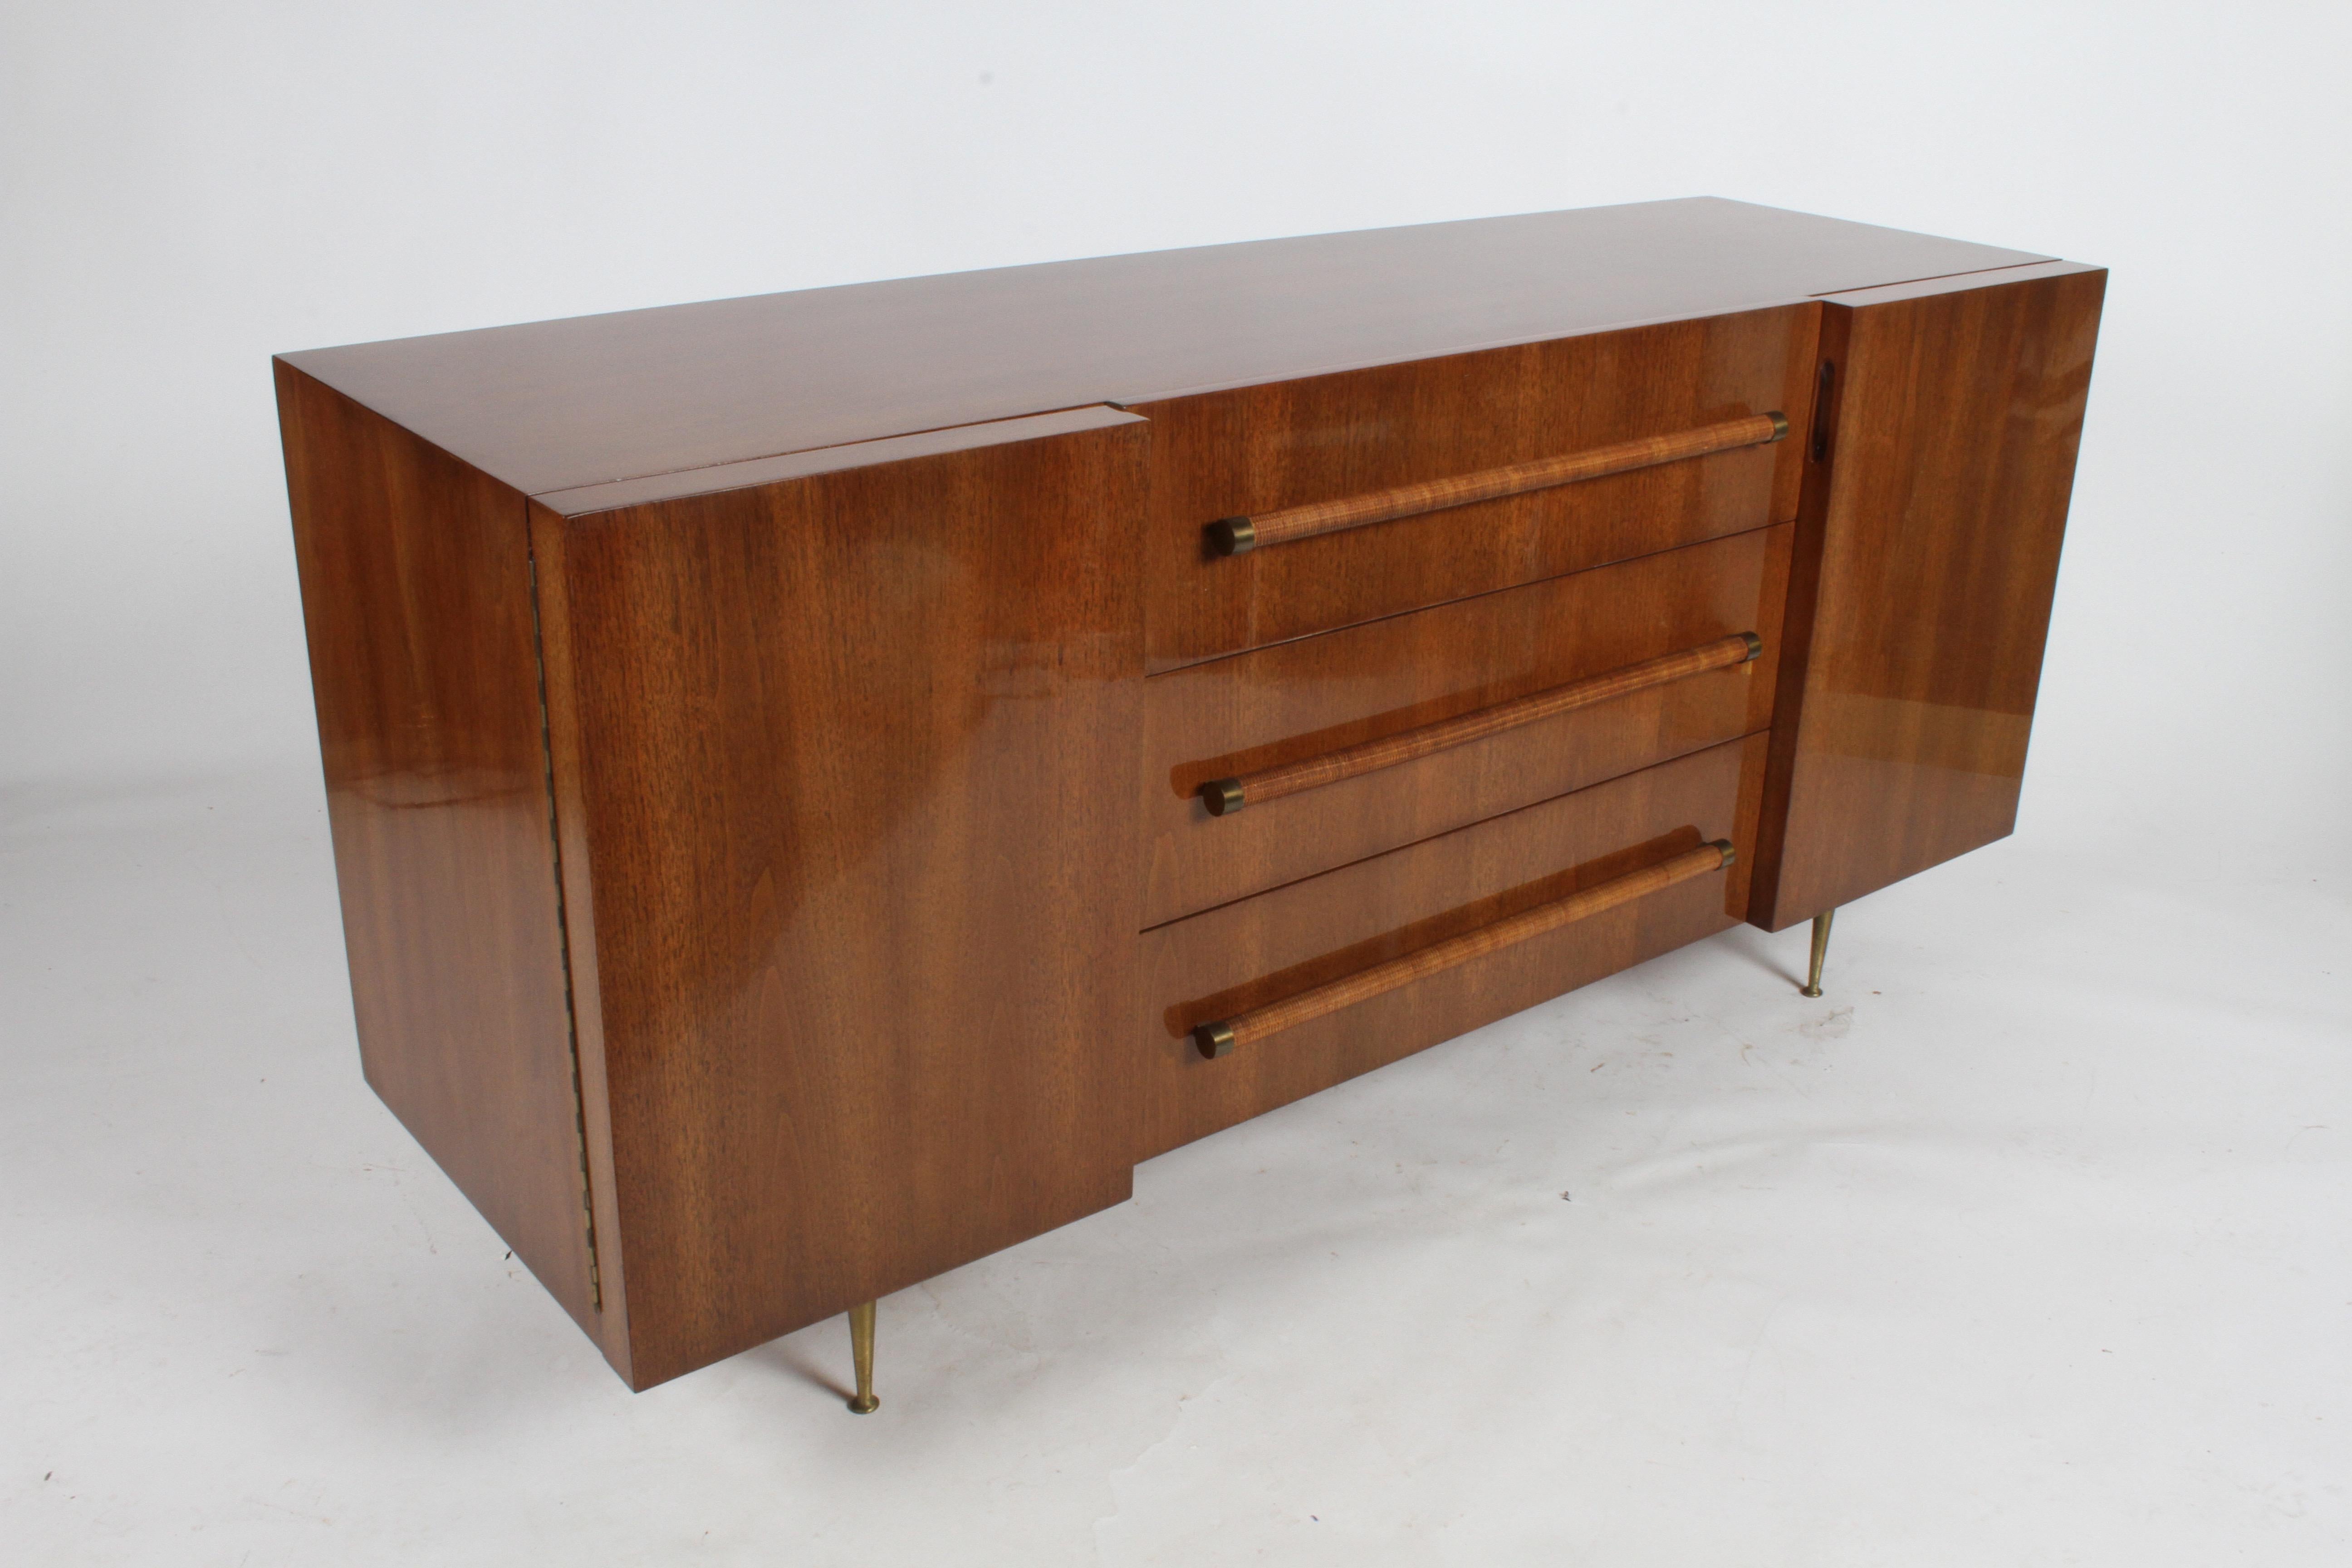 Rarely seen elegant T.H. Robsjohn-Gibbings for Widdicomb sideboard or dresser. Completely restored cabinet to original color shown with heavy build hand polished clear coat, is now SOLD. I have acquired another, it is currently being refinished, it